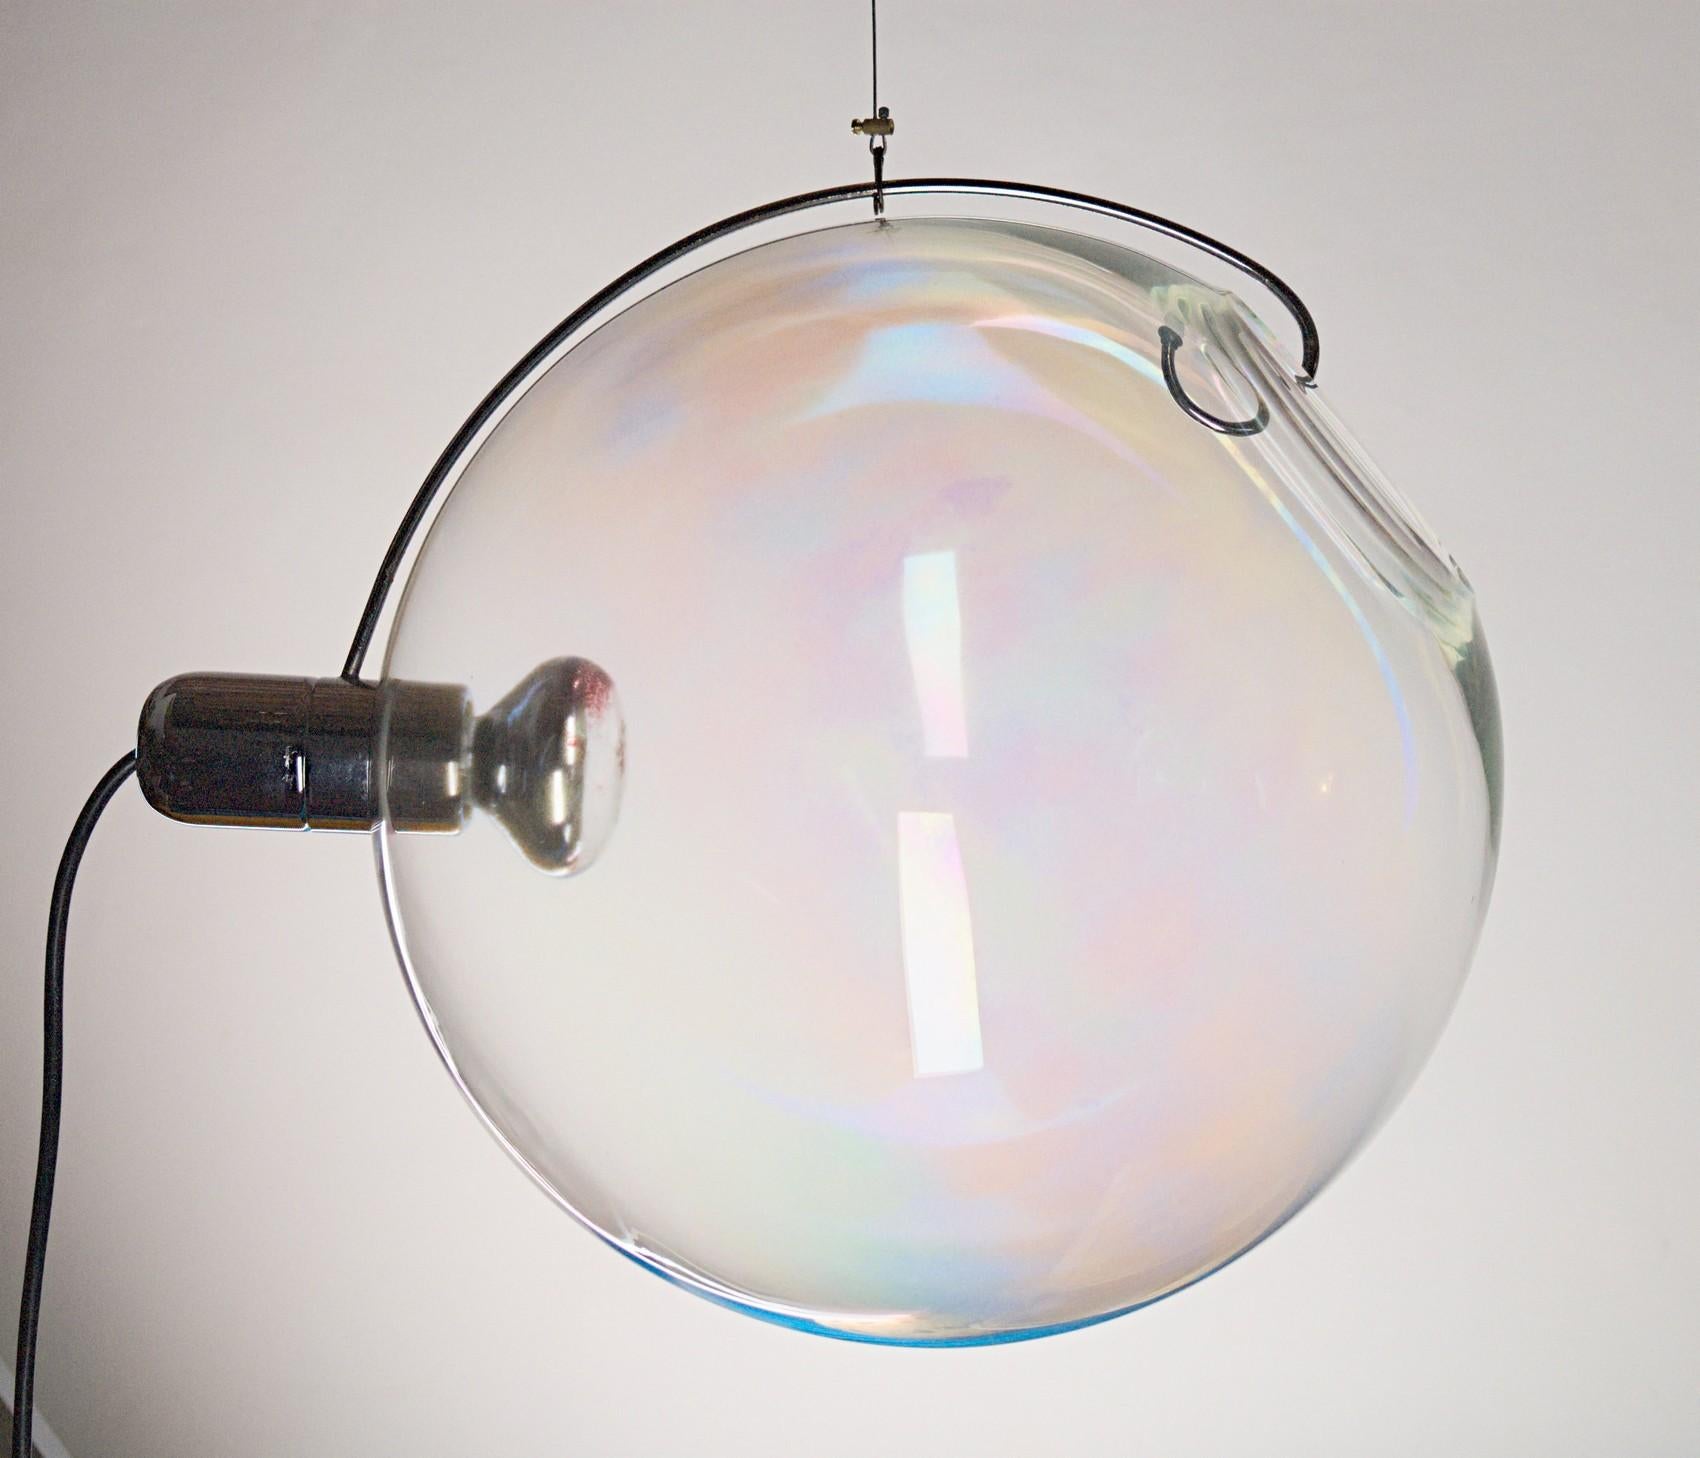 This pair of lamps were designed by Carlo Nason for Lumenform in the early 1970s. Large glass sphere. All the traditional concepts of a lamp has been radically changed.
The glass is not a shade, it's to change the orientation of the spot light.